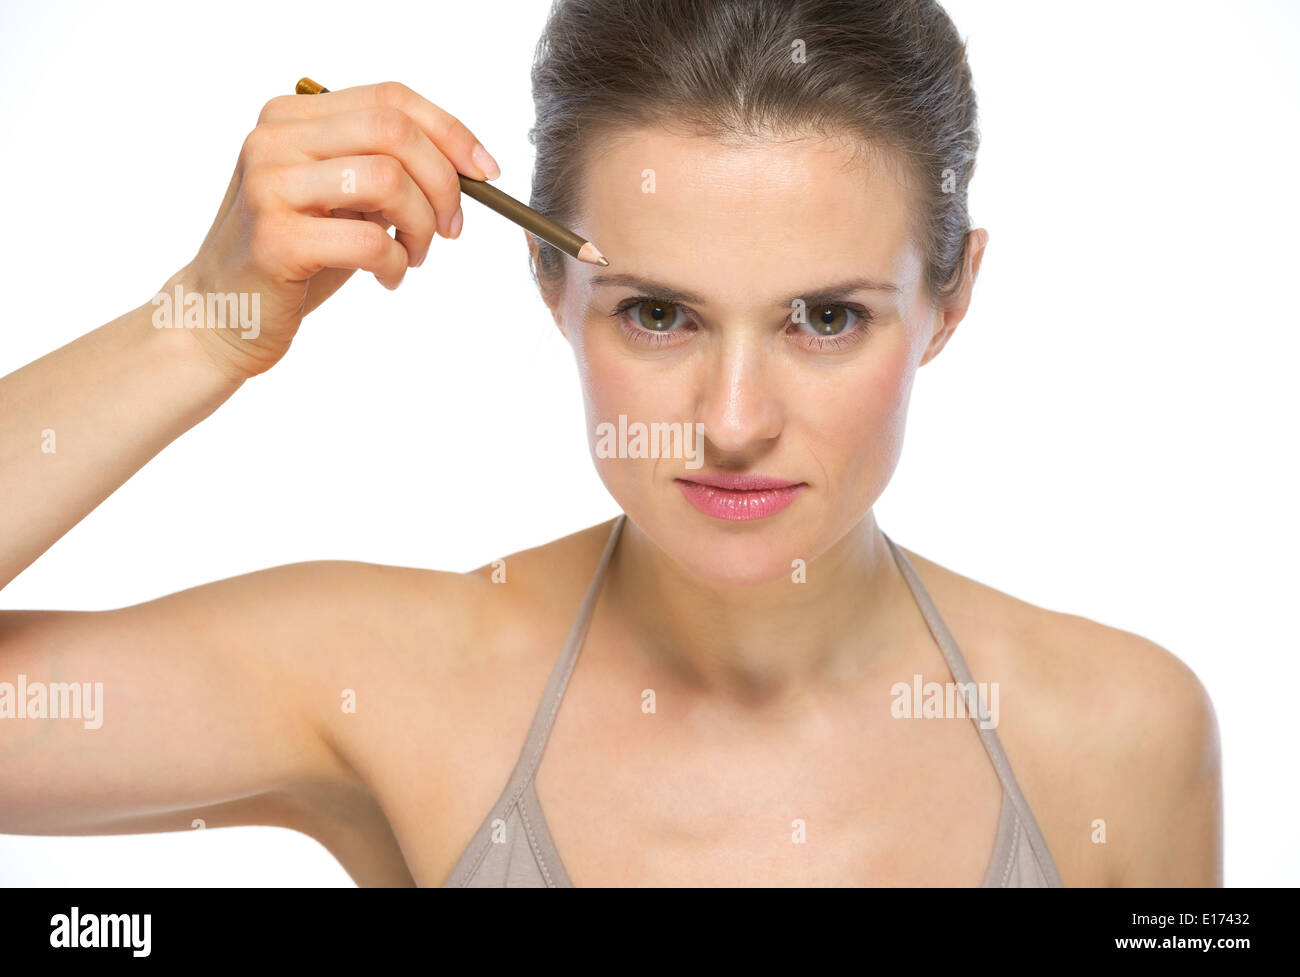 Portrait of young woman using eyebrows pencil Stock Photo